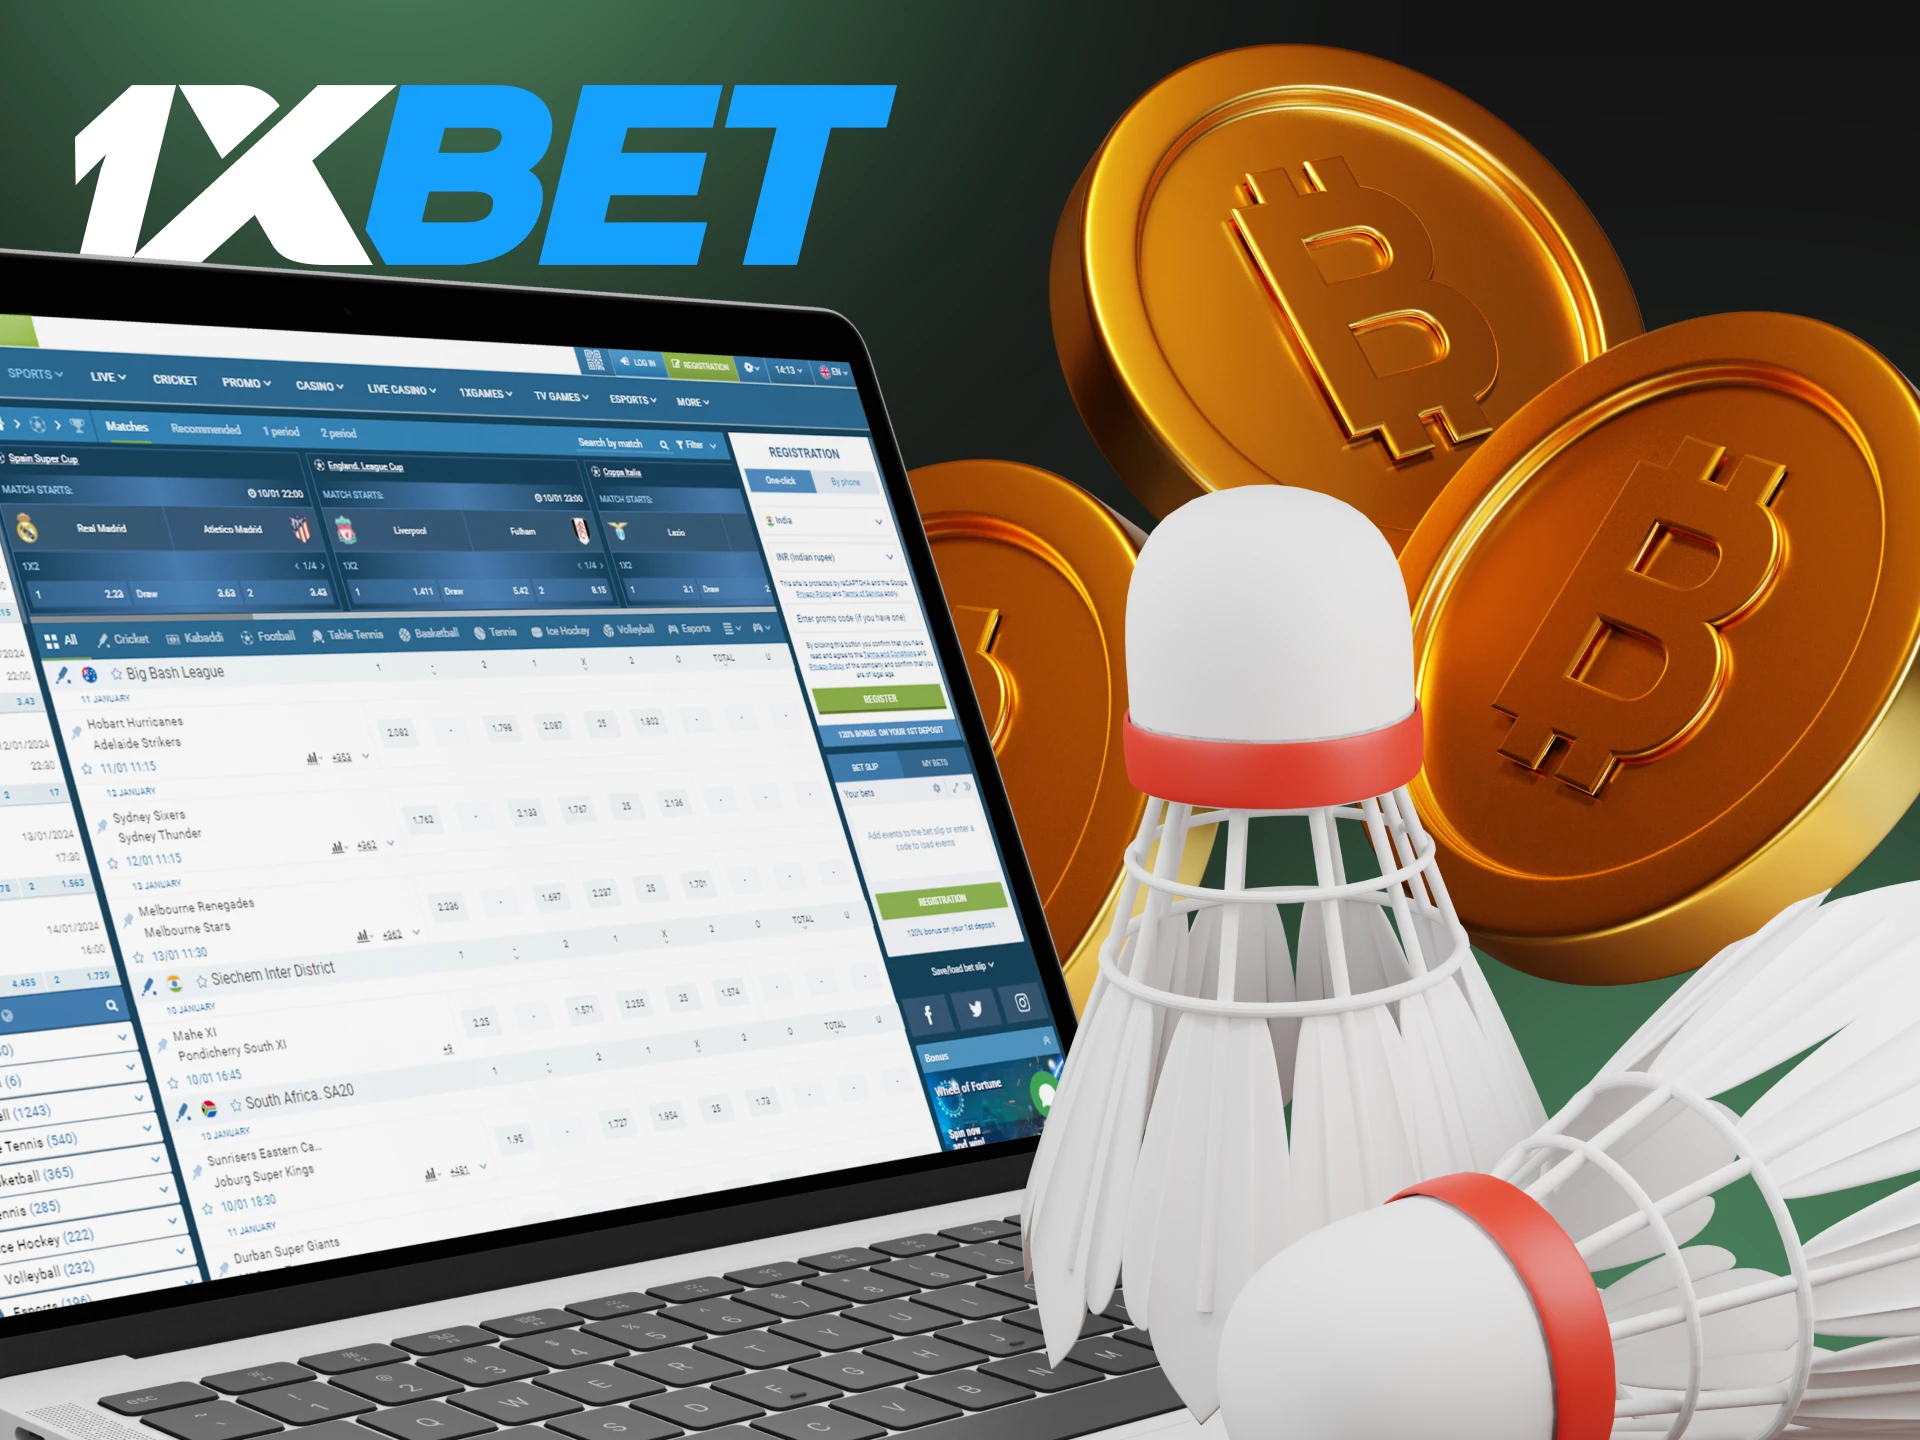 1xBet is a reliable site for sports betting using cryptocurrency.